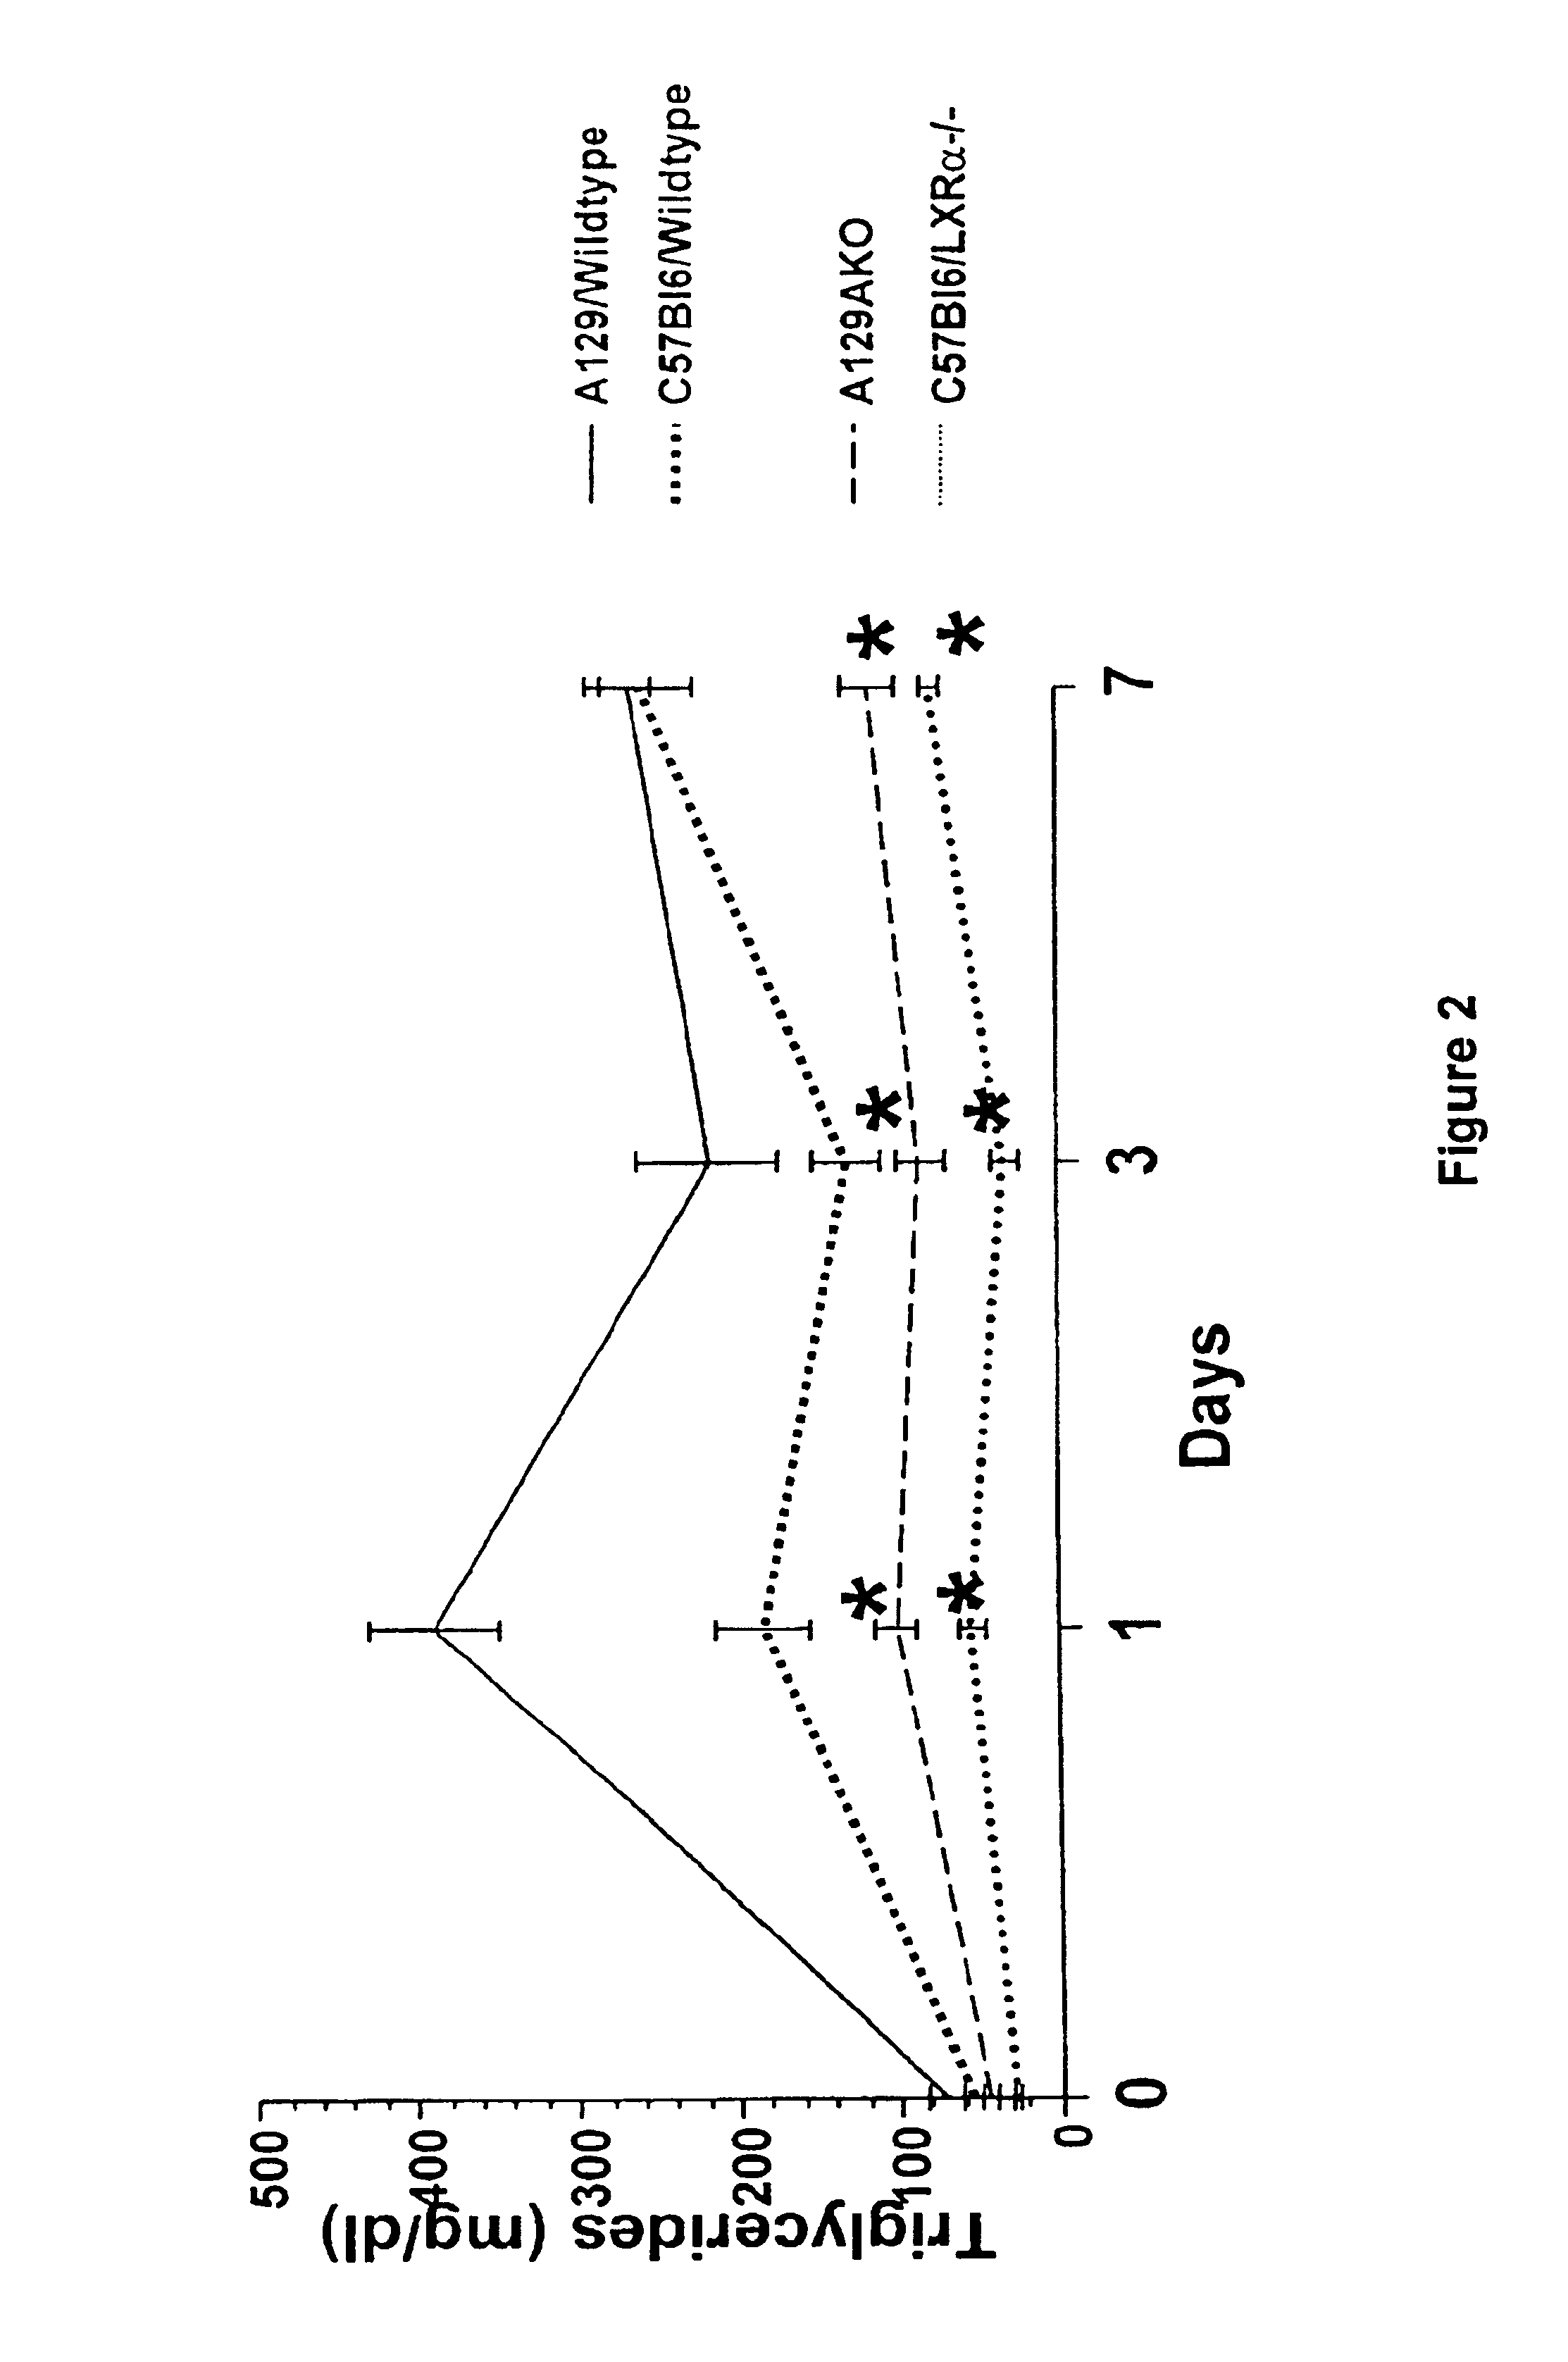 Methods for affecting various diseases utilizing LXR compounds